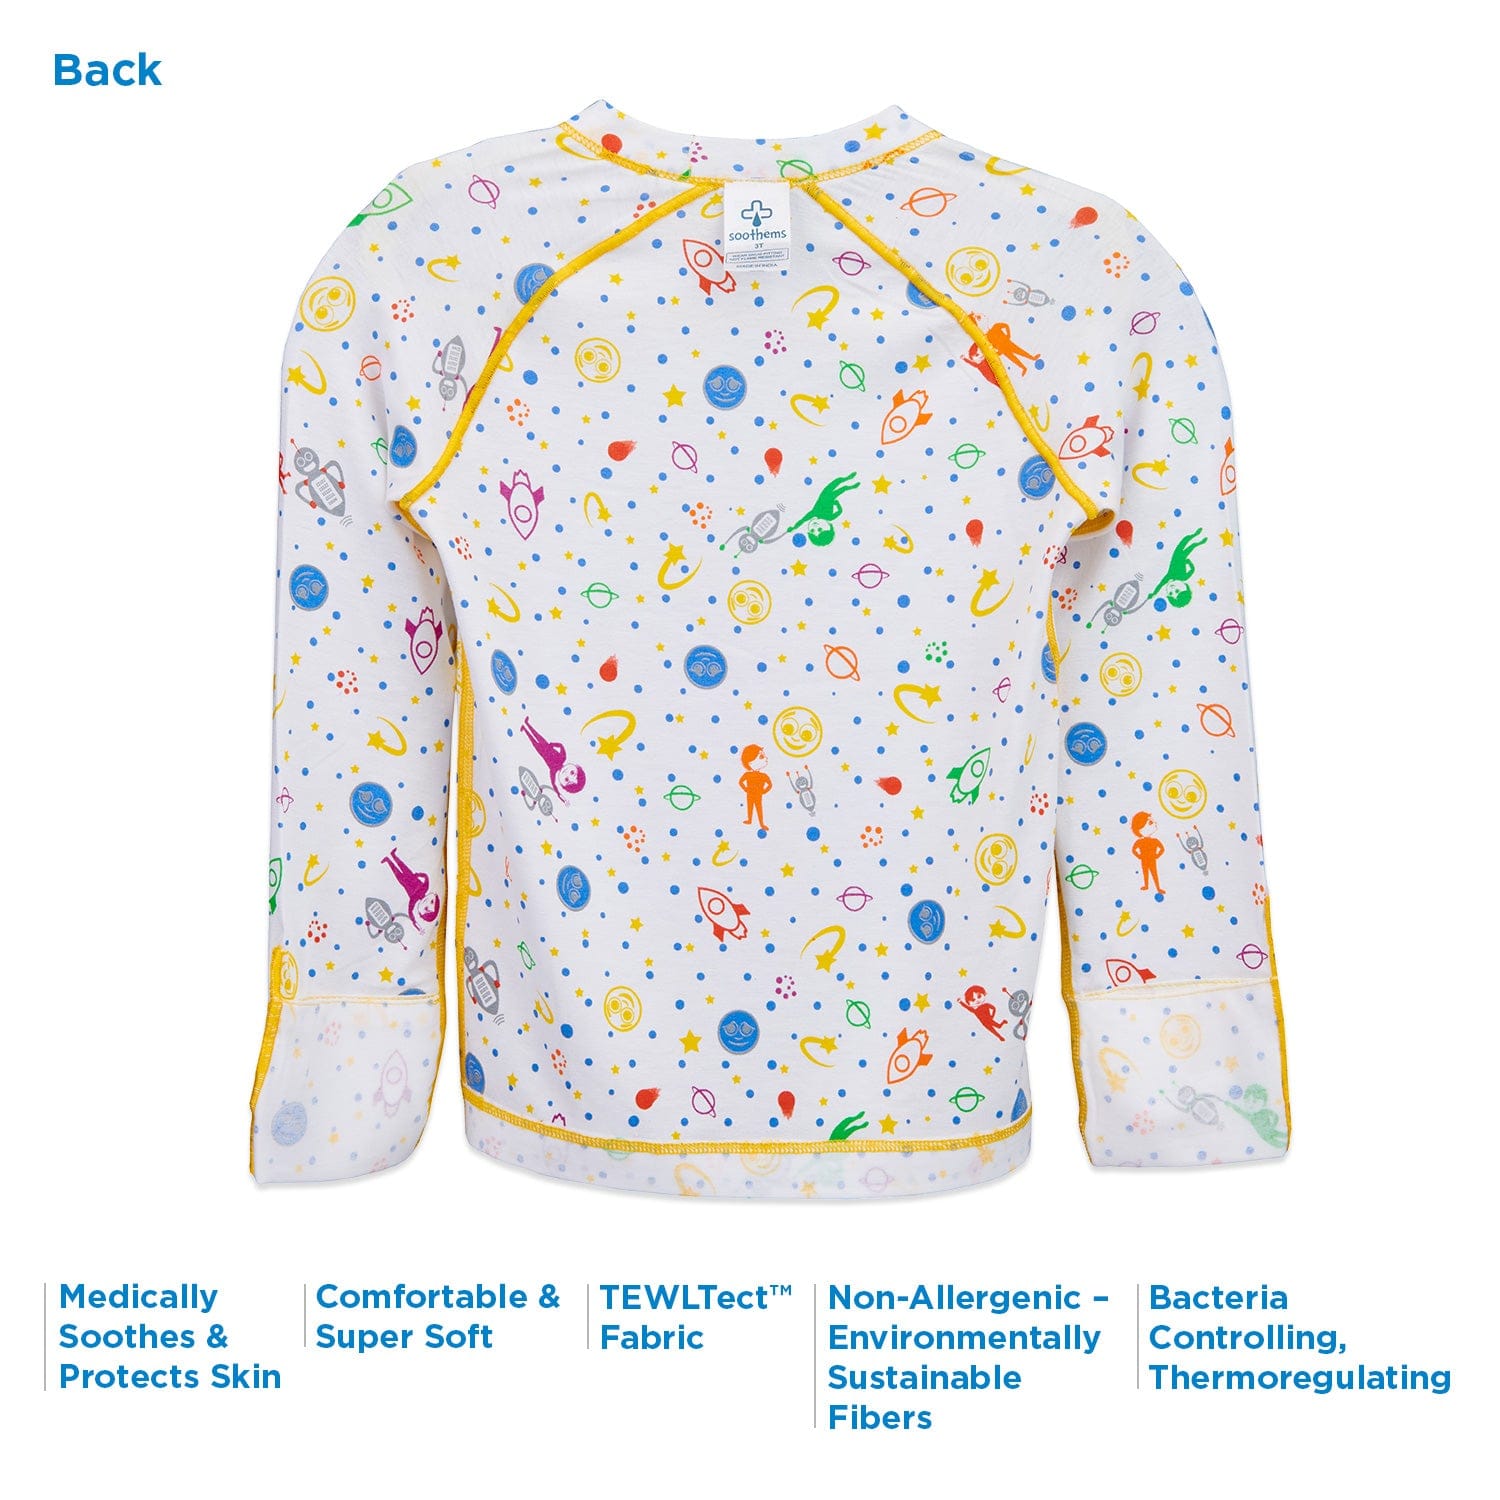 “Atopic Dermatitis Sleepwear and Clothing for children Stops Scratching from Eczema at Night”